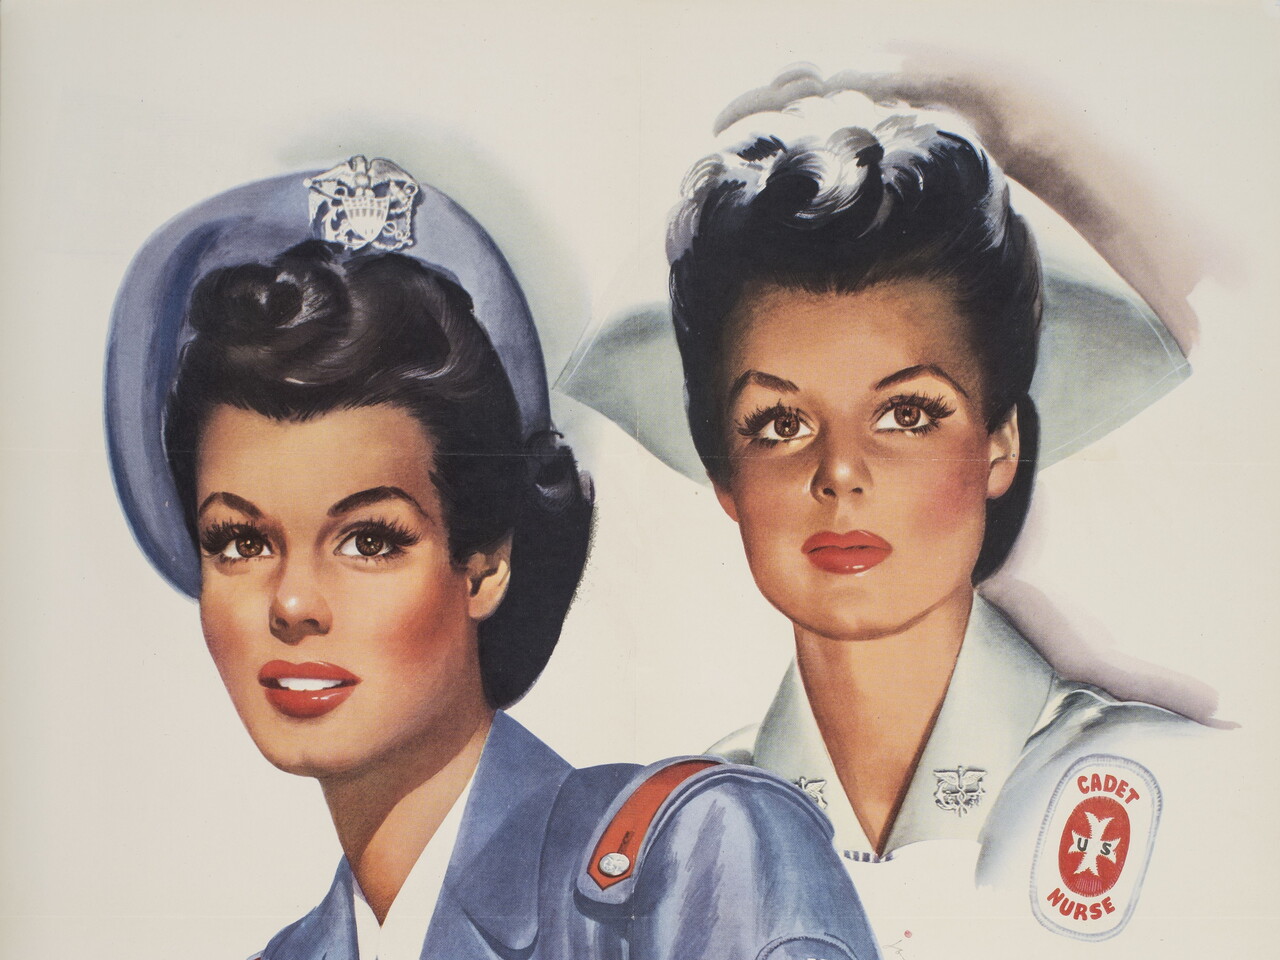 1944 poster encouraging women to join the US Cadet Nurse Corps.